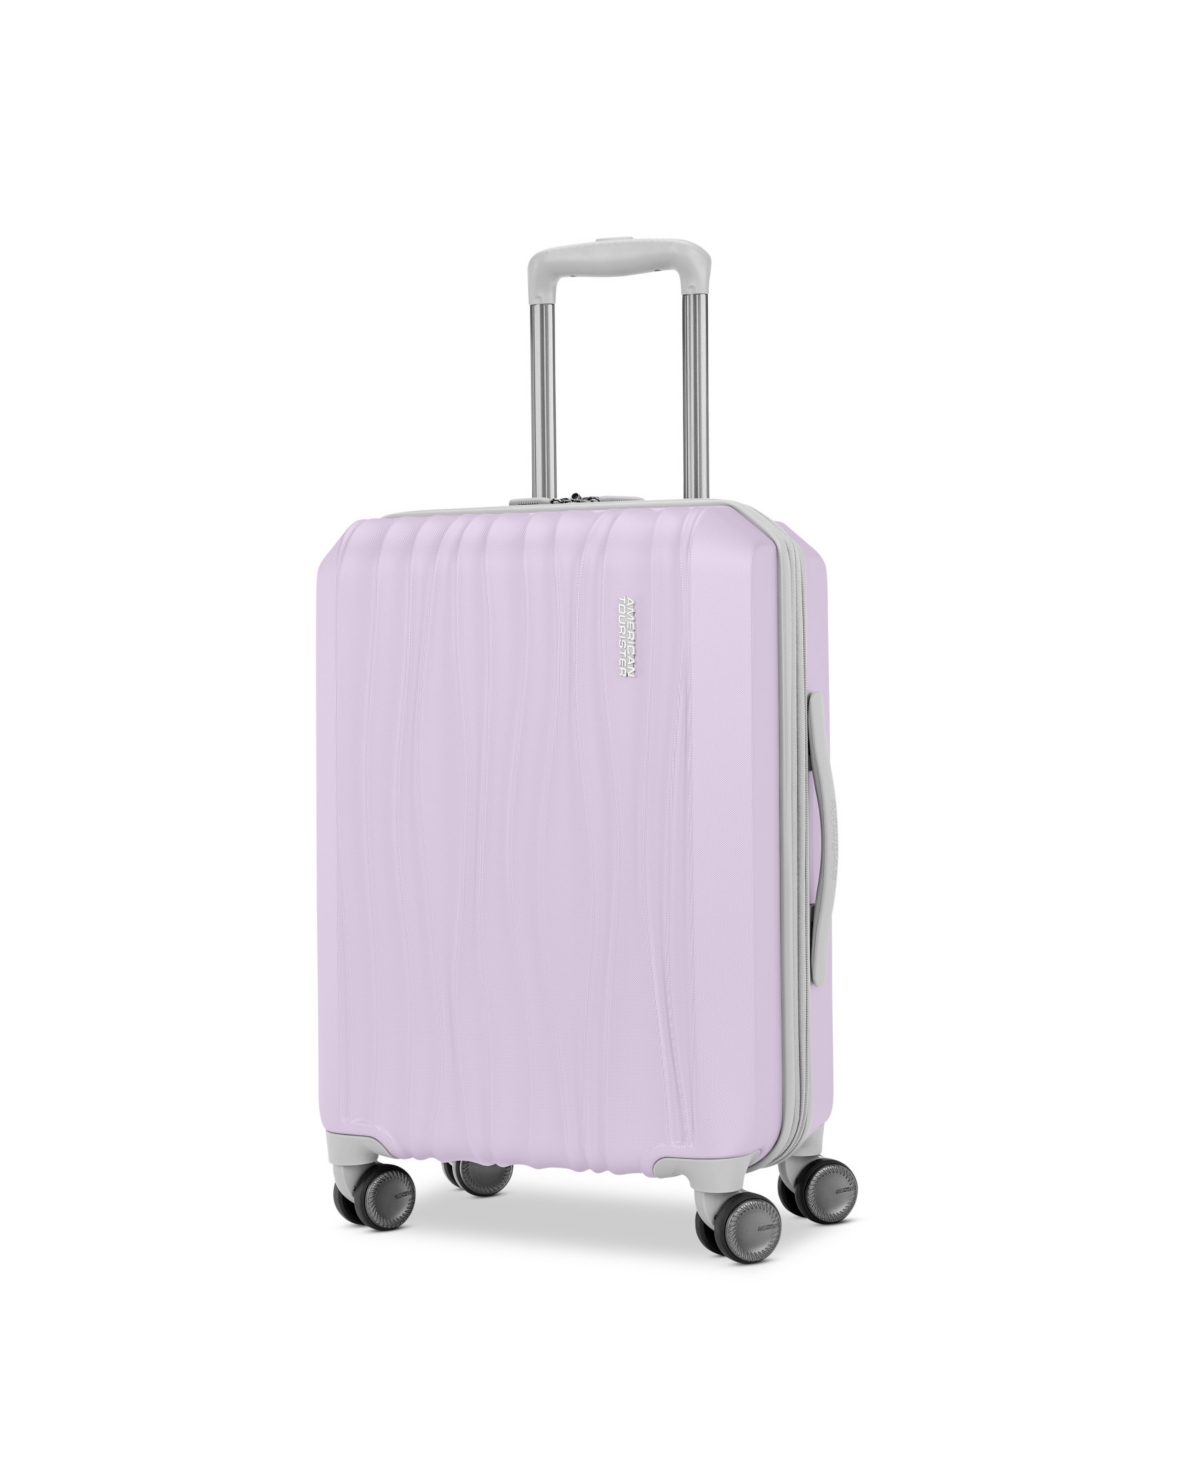 American Tourister Tribute Encore Hardside Carry On 20" Spinner Luggage In Icy Lilac